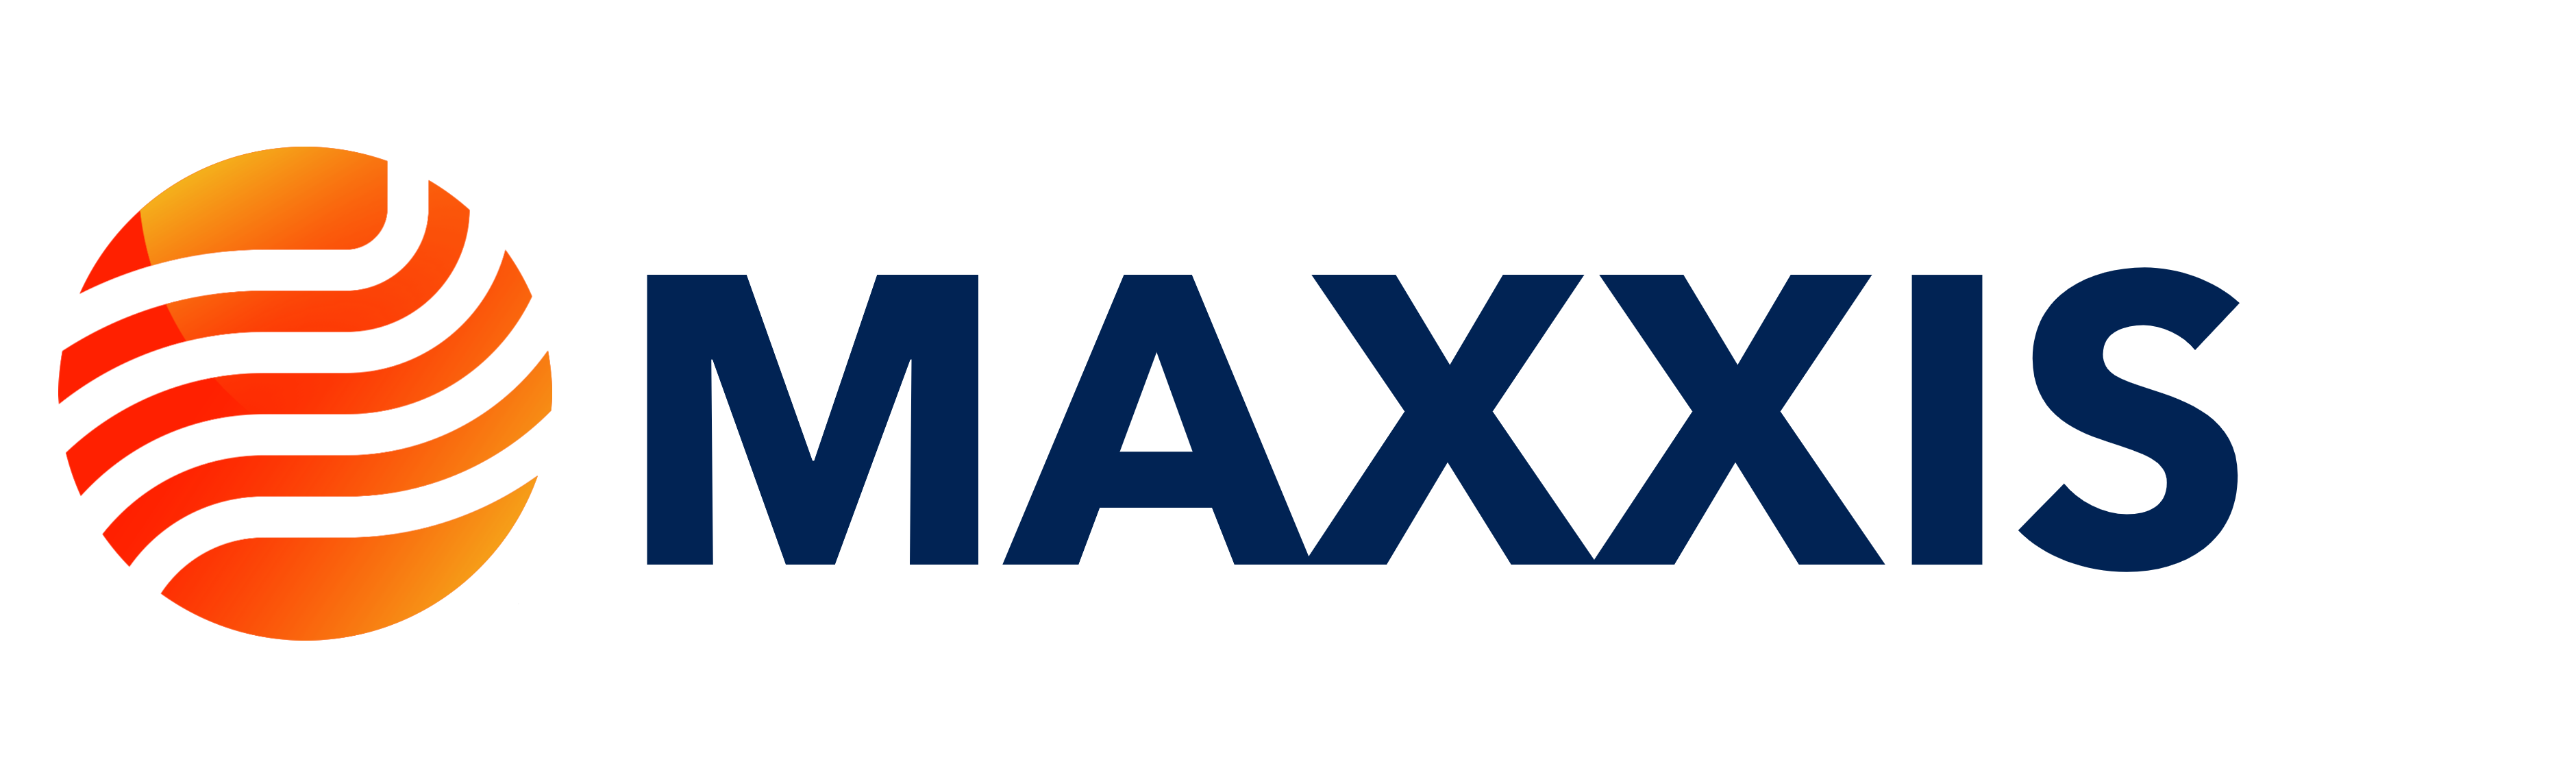 Maxxis Group